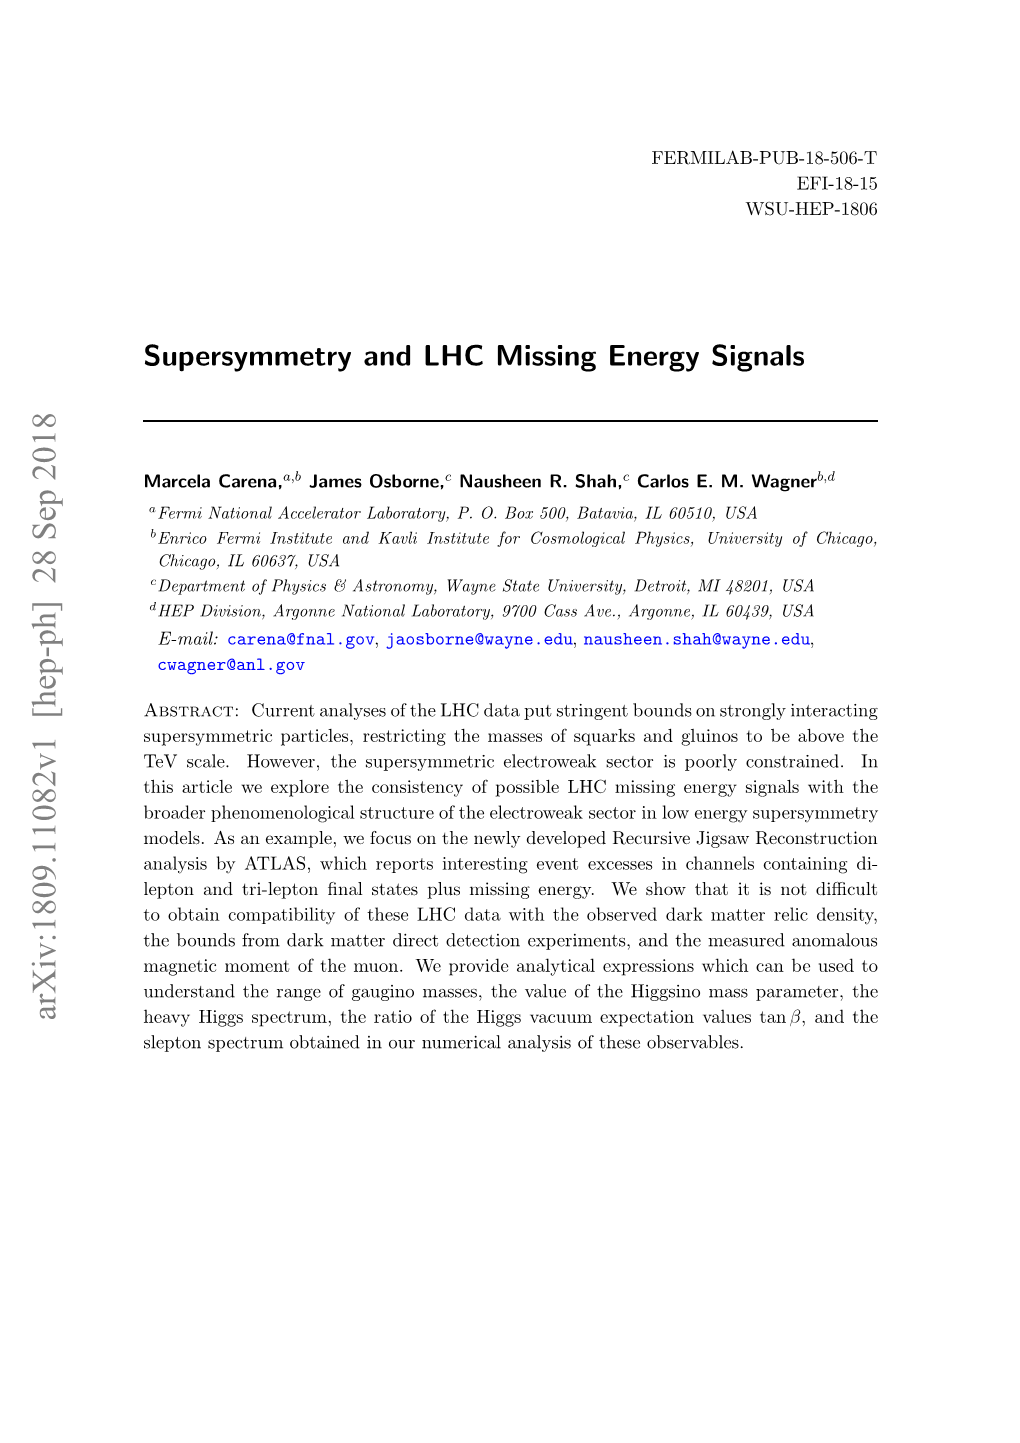 Supersymmetry and LHC Missing Energy Signals